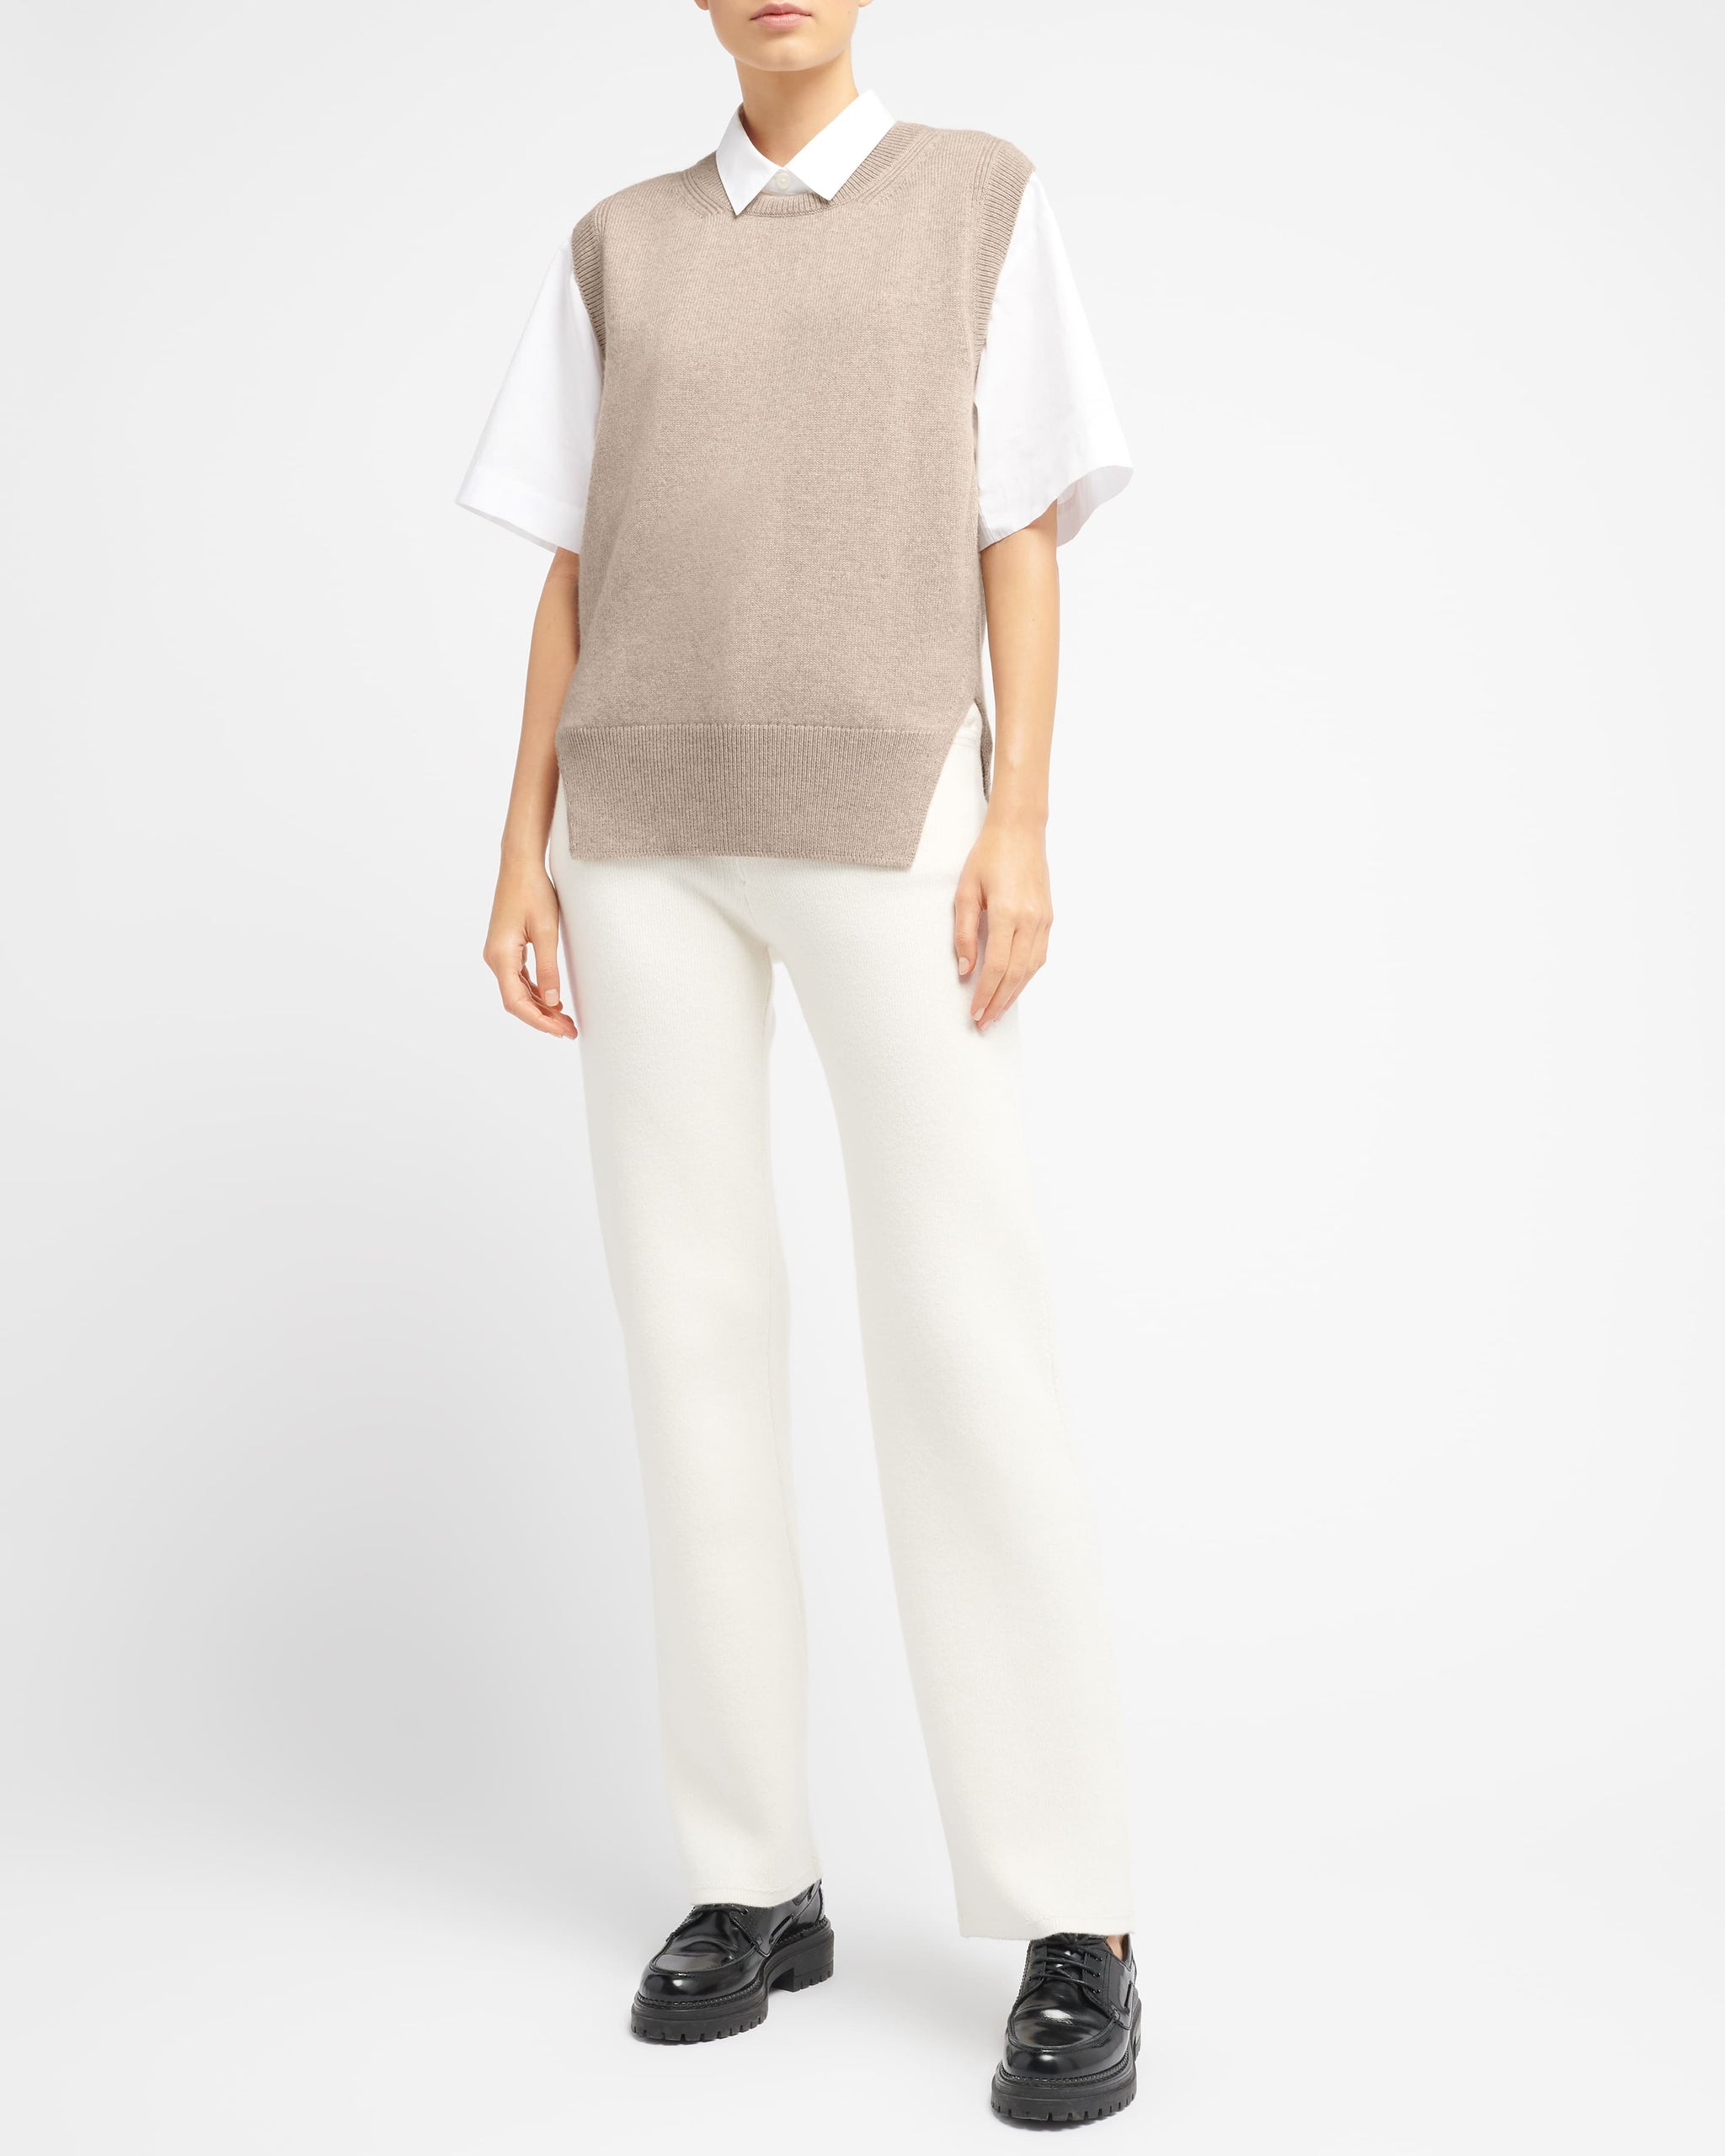 June Sleeveless Sweater by Jorge Online, THE ICONIC